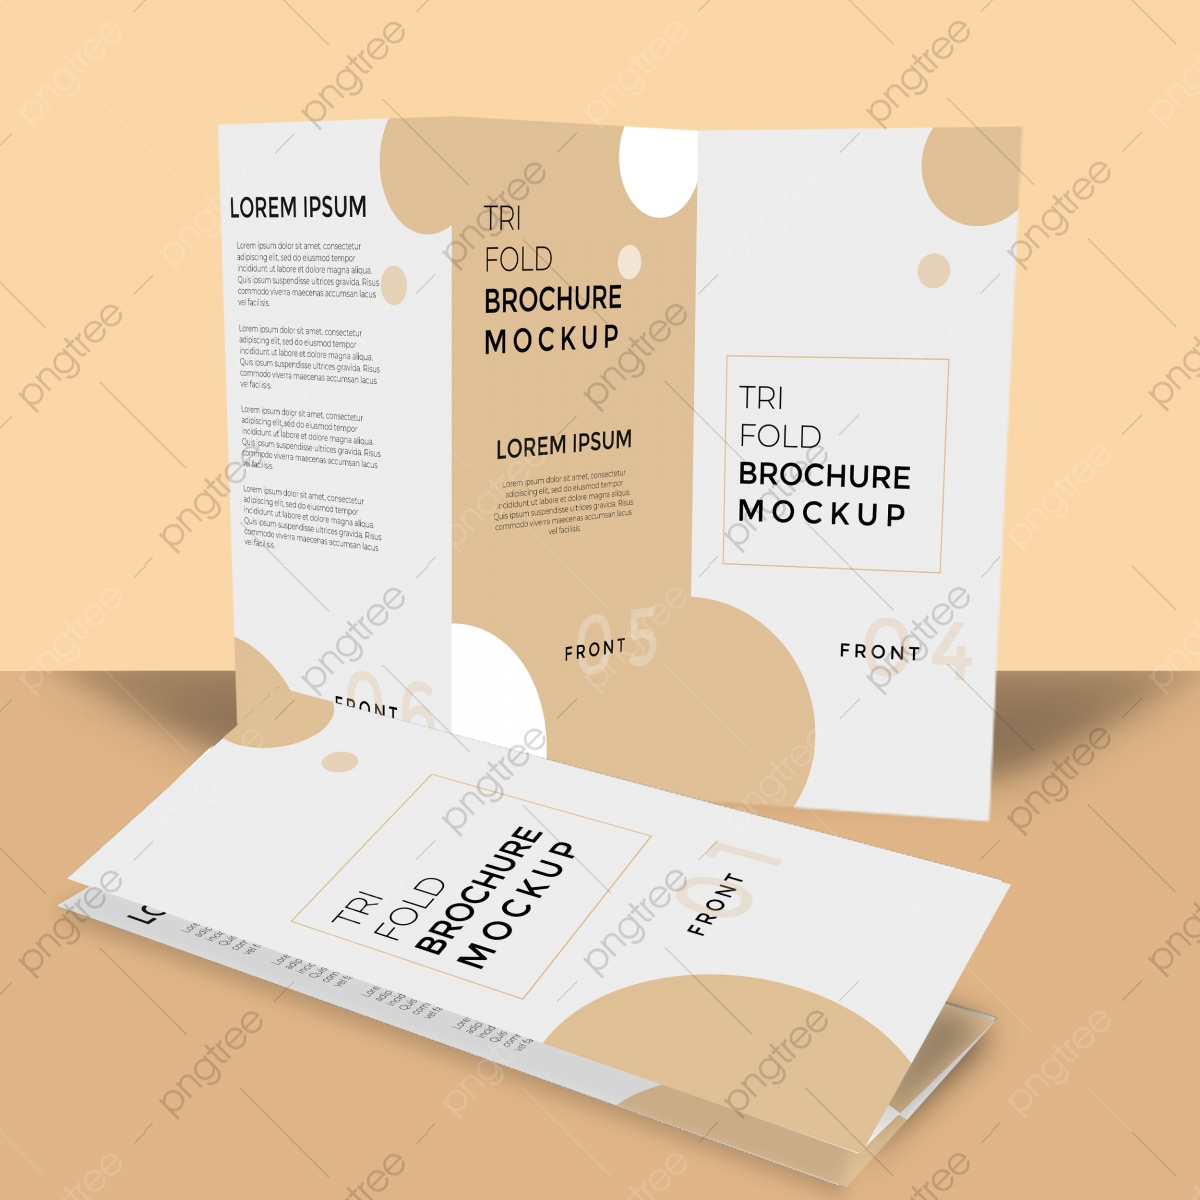 Double Sided Trifold Brochure Mockup Template Download on Pngtree